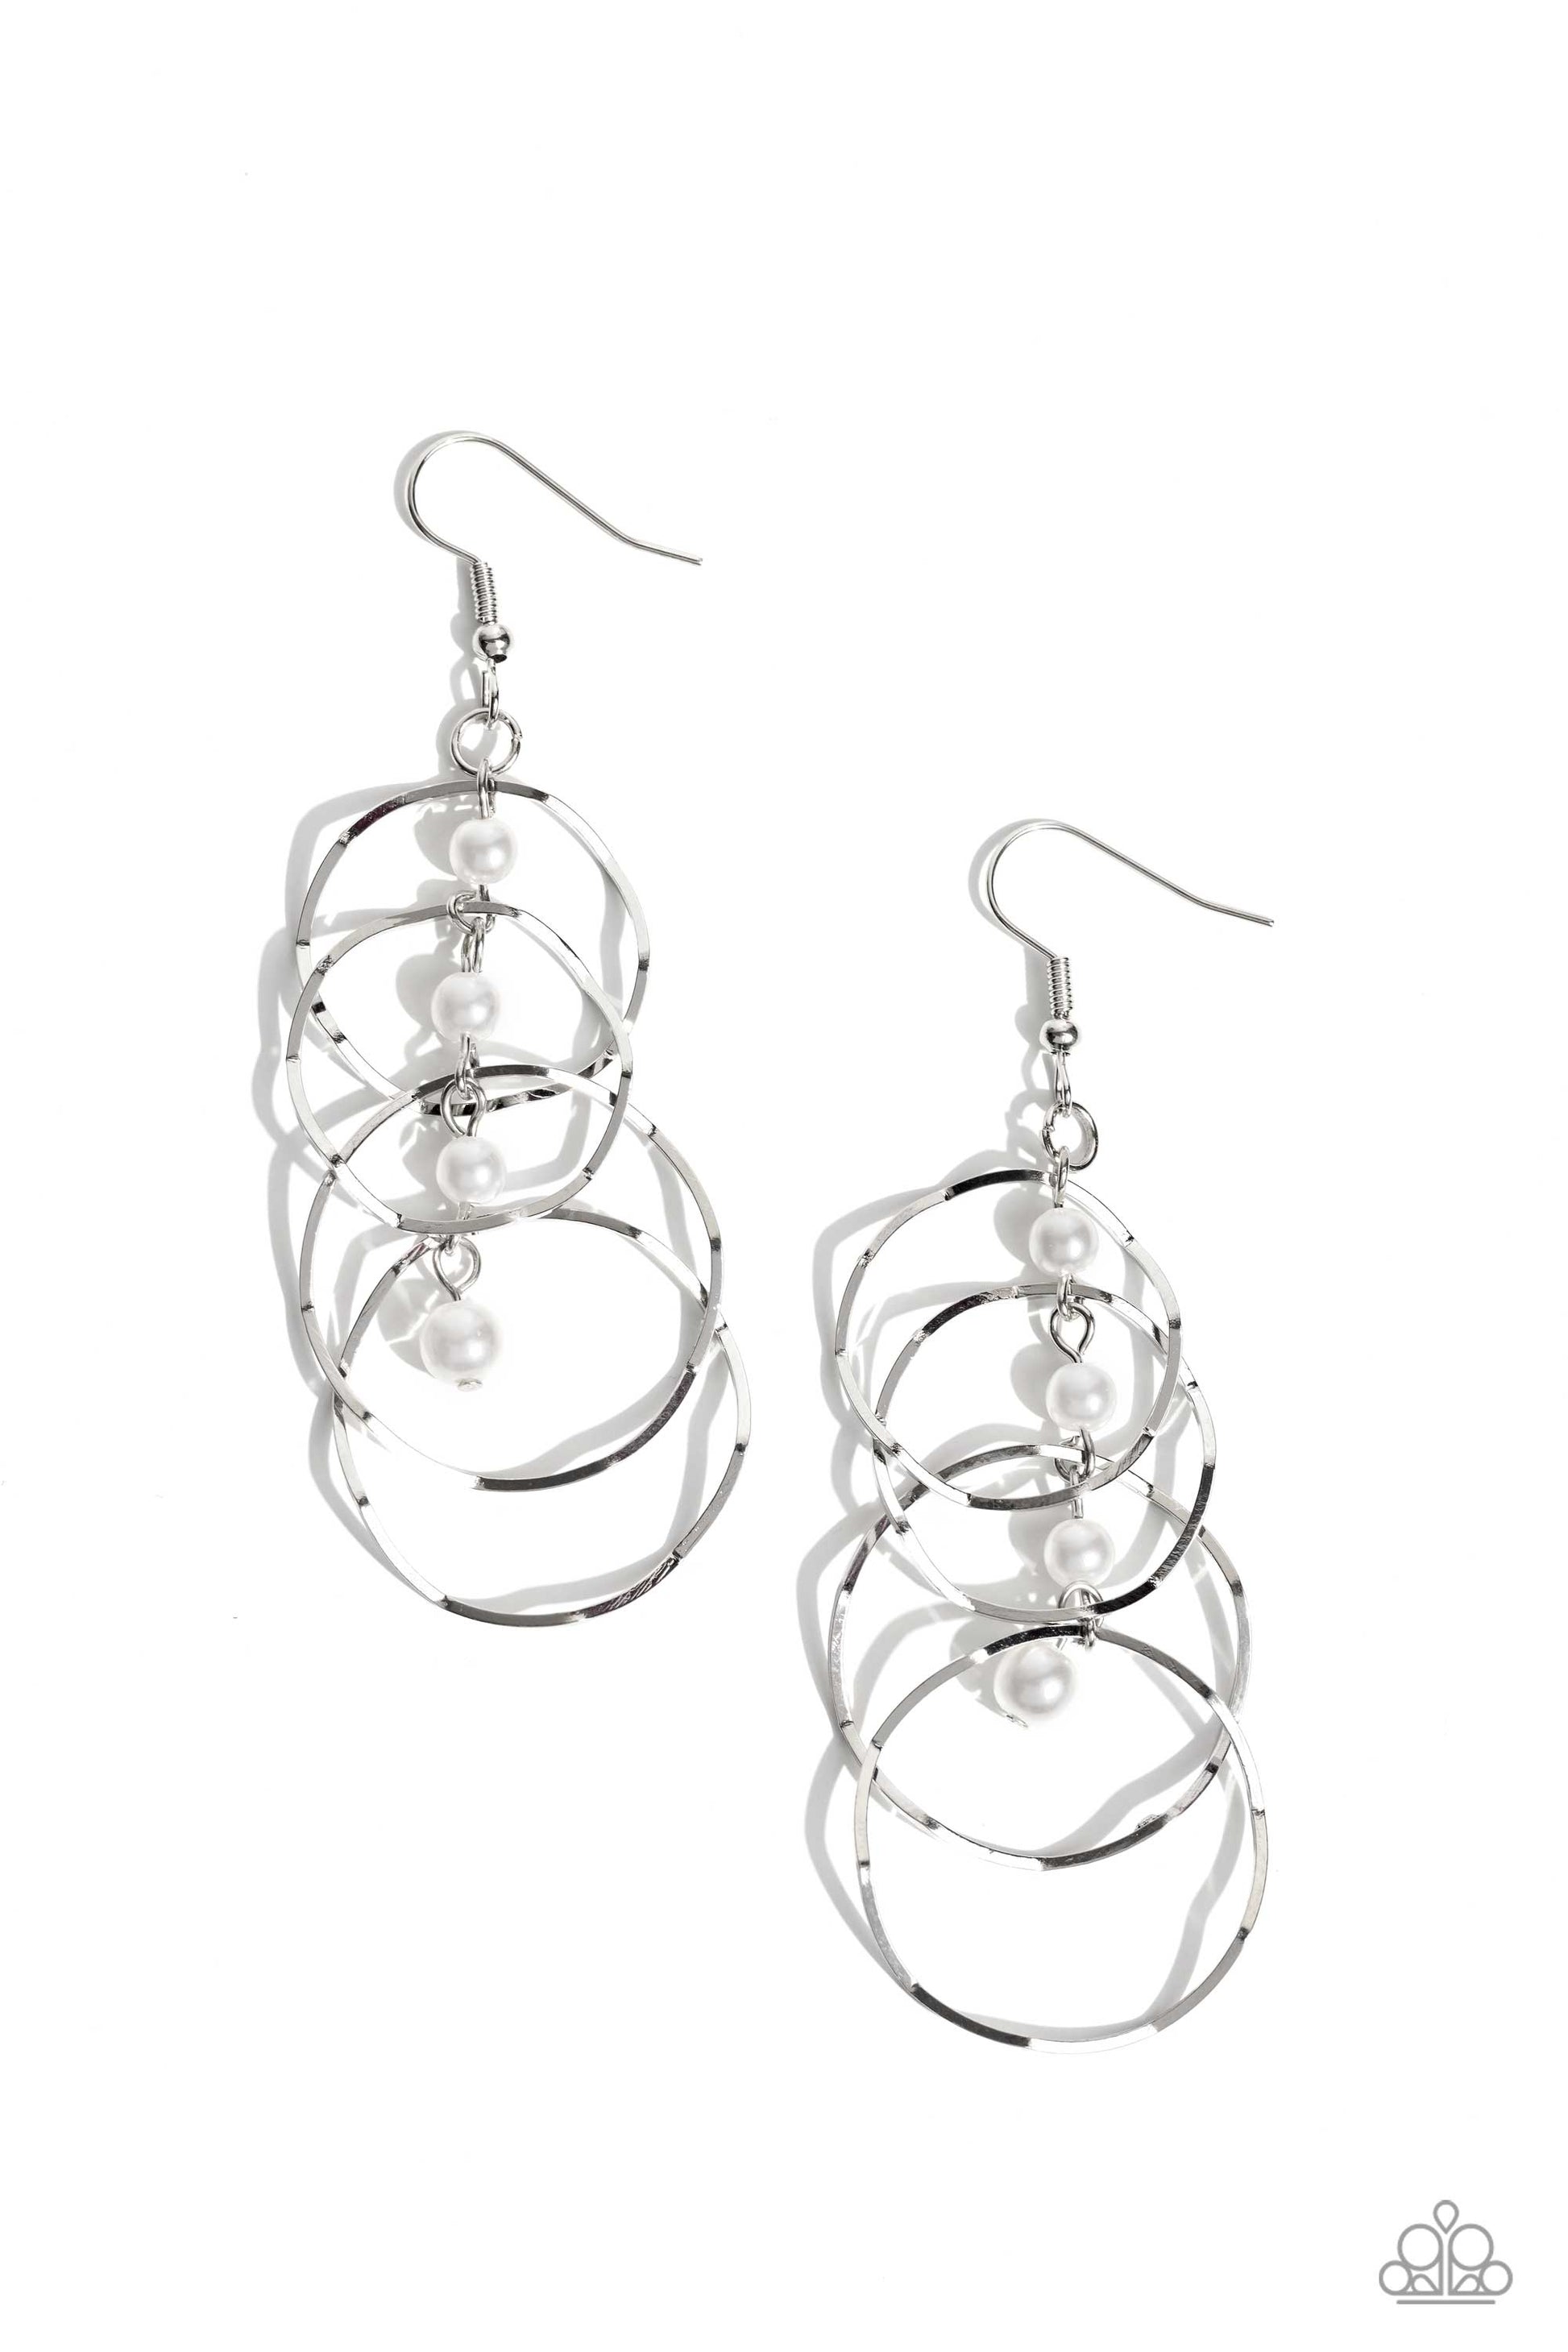 <p>Zigzagging silver hoops trickle from a dainty strand of white pearls, overlapping into a bubbly lure. Earring attaches to a standard fishhook fitting.</p> <p><i> Sold as one pair of earrings.</i></p>